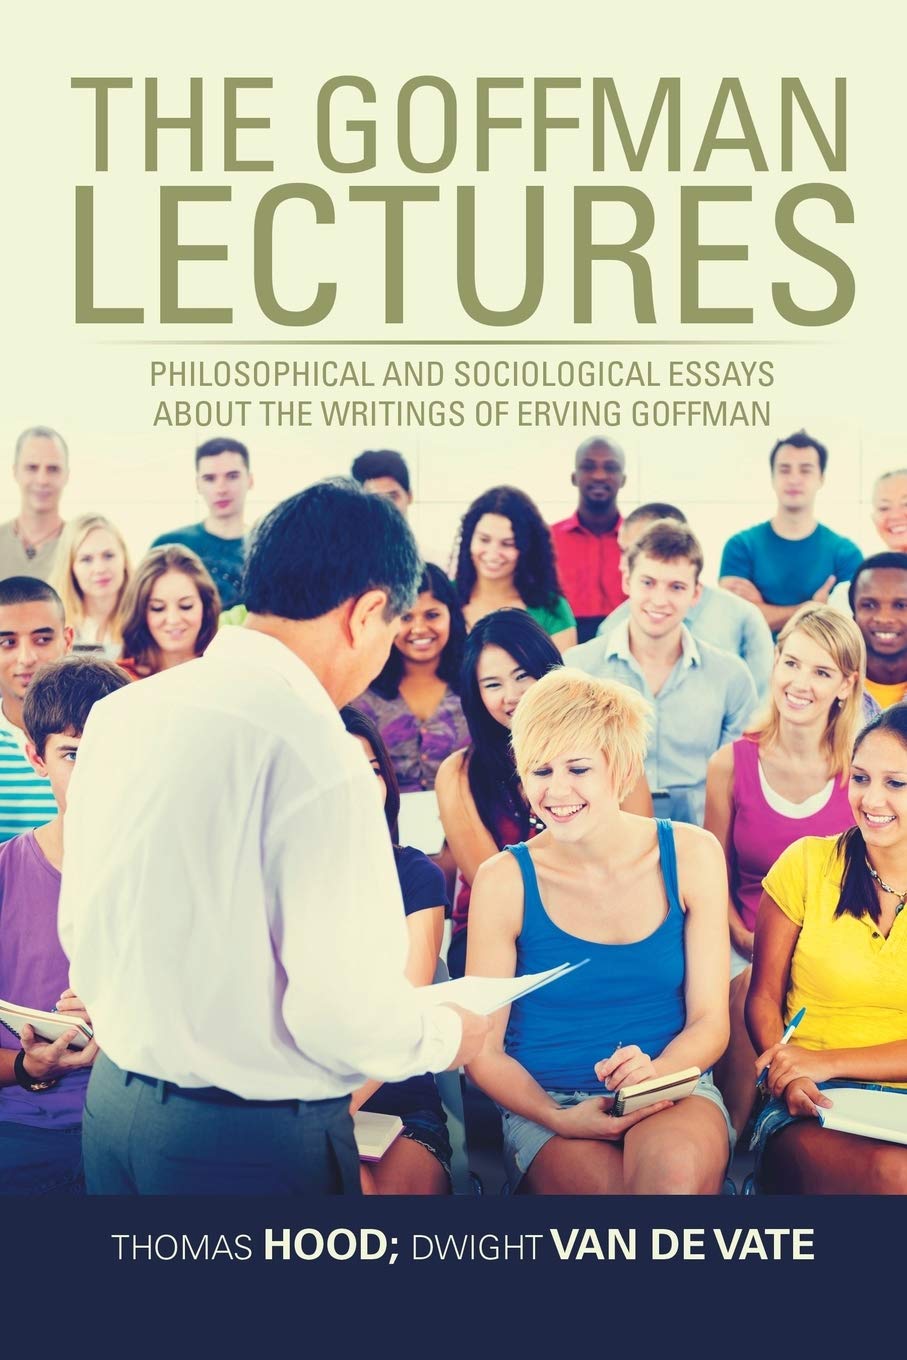 Author’s Tranquility Press Promotes The Goffman Lectures by Tom Hood, Ph.D. Amid Rave Reviews